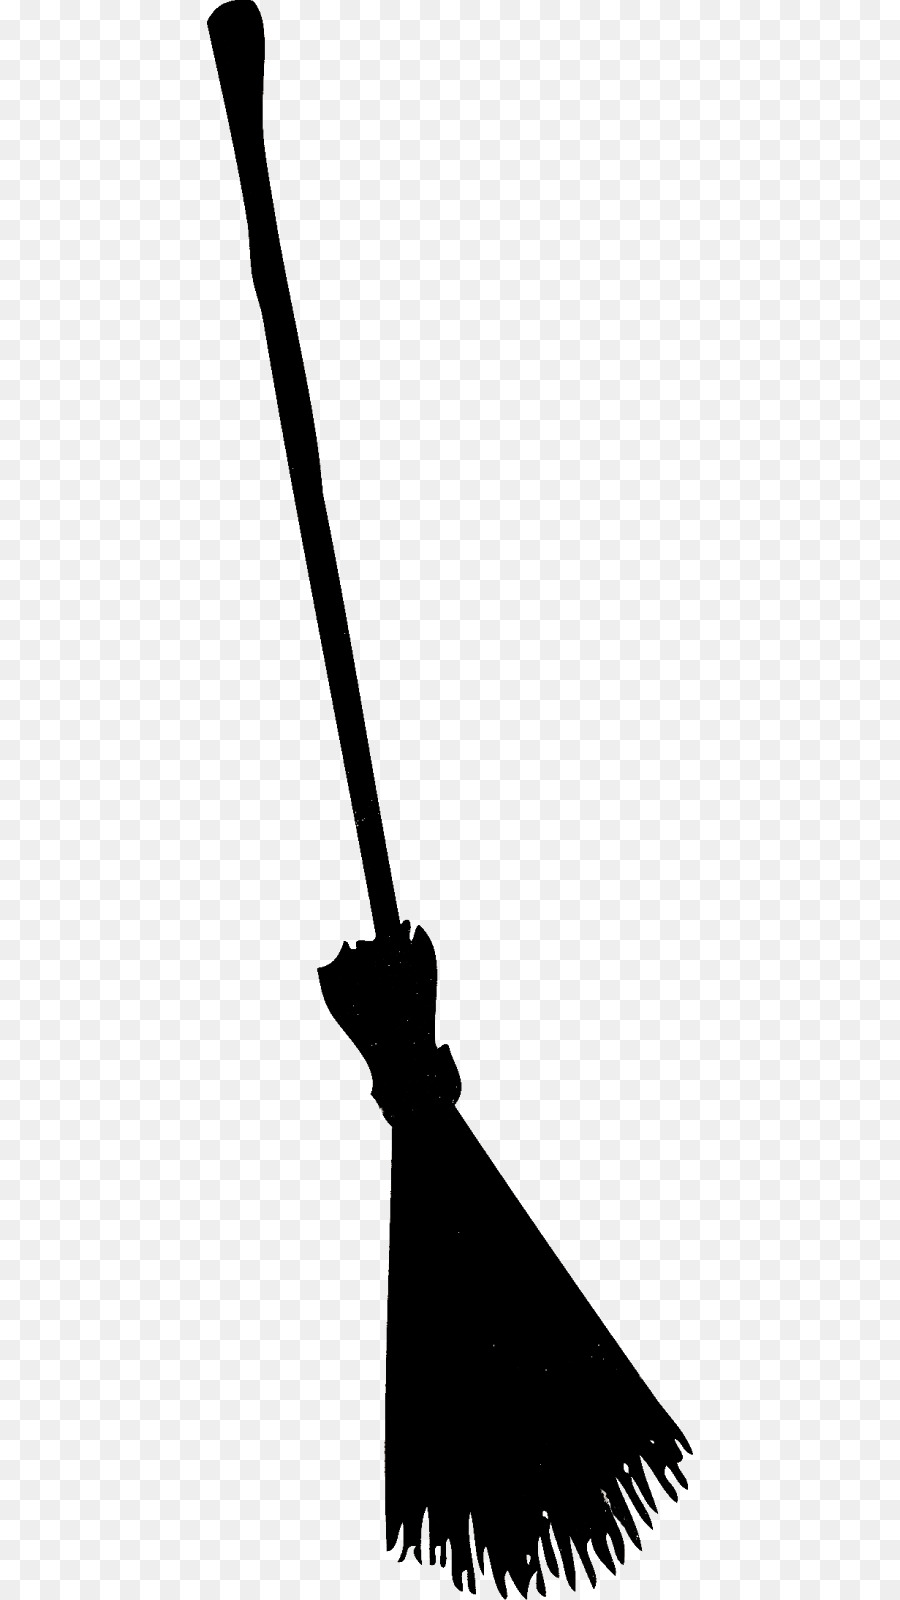 Broom Silhouette Clip art - Silhouette png download - 486*1600 - Free Transparent Broom png Download.